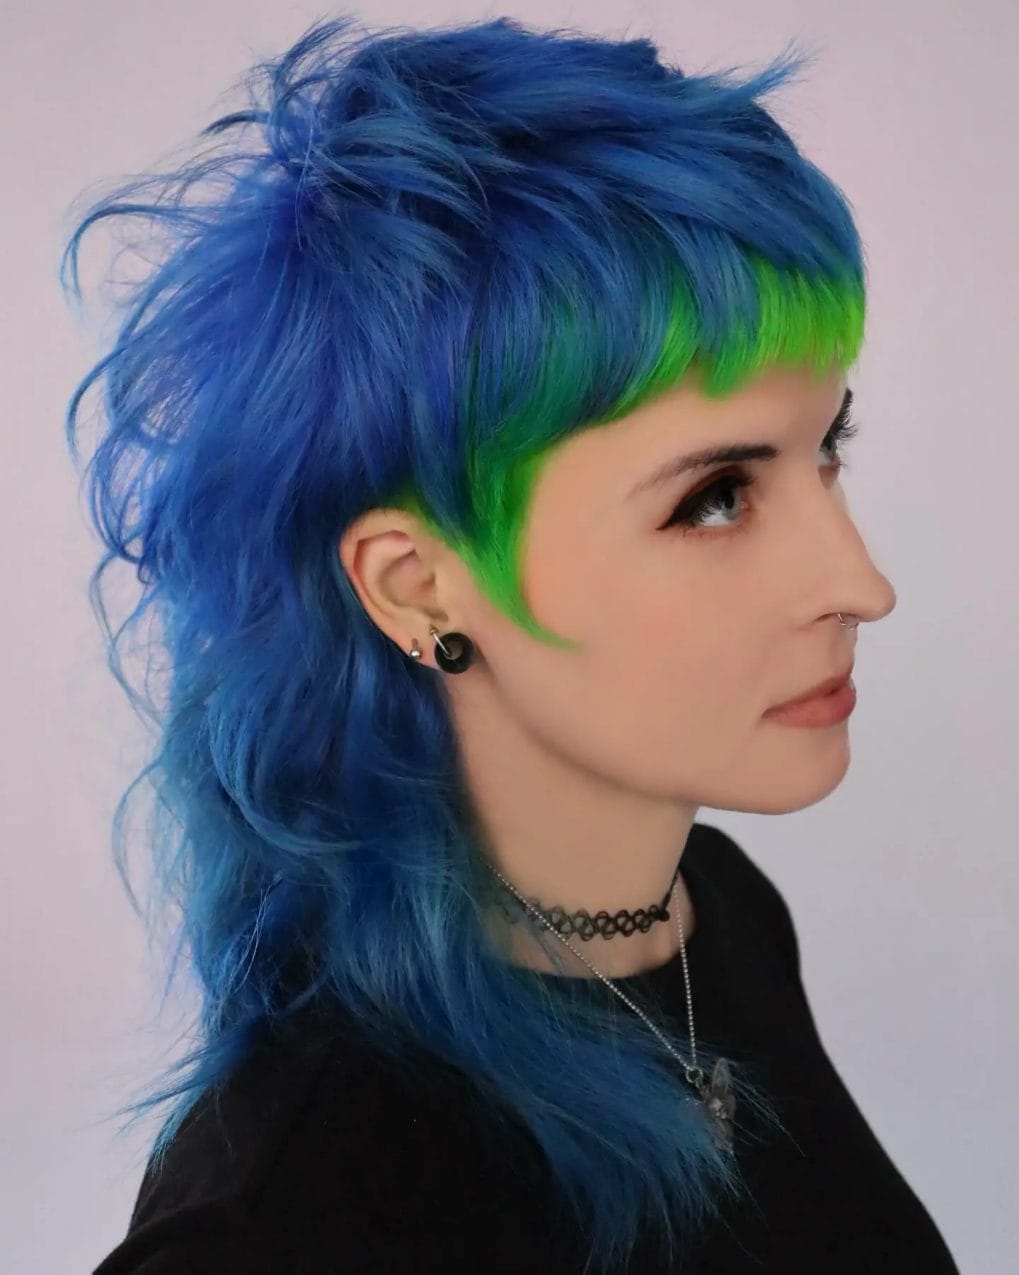 Shaggy mullet with electric blue and neon green highlights and angular bangs